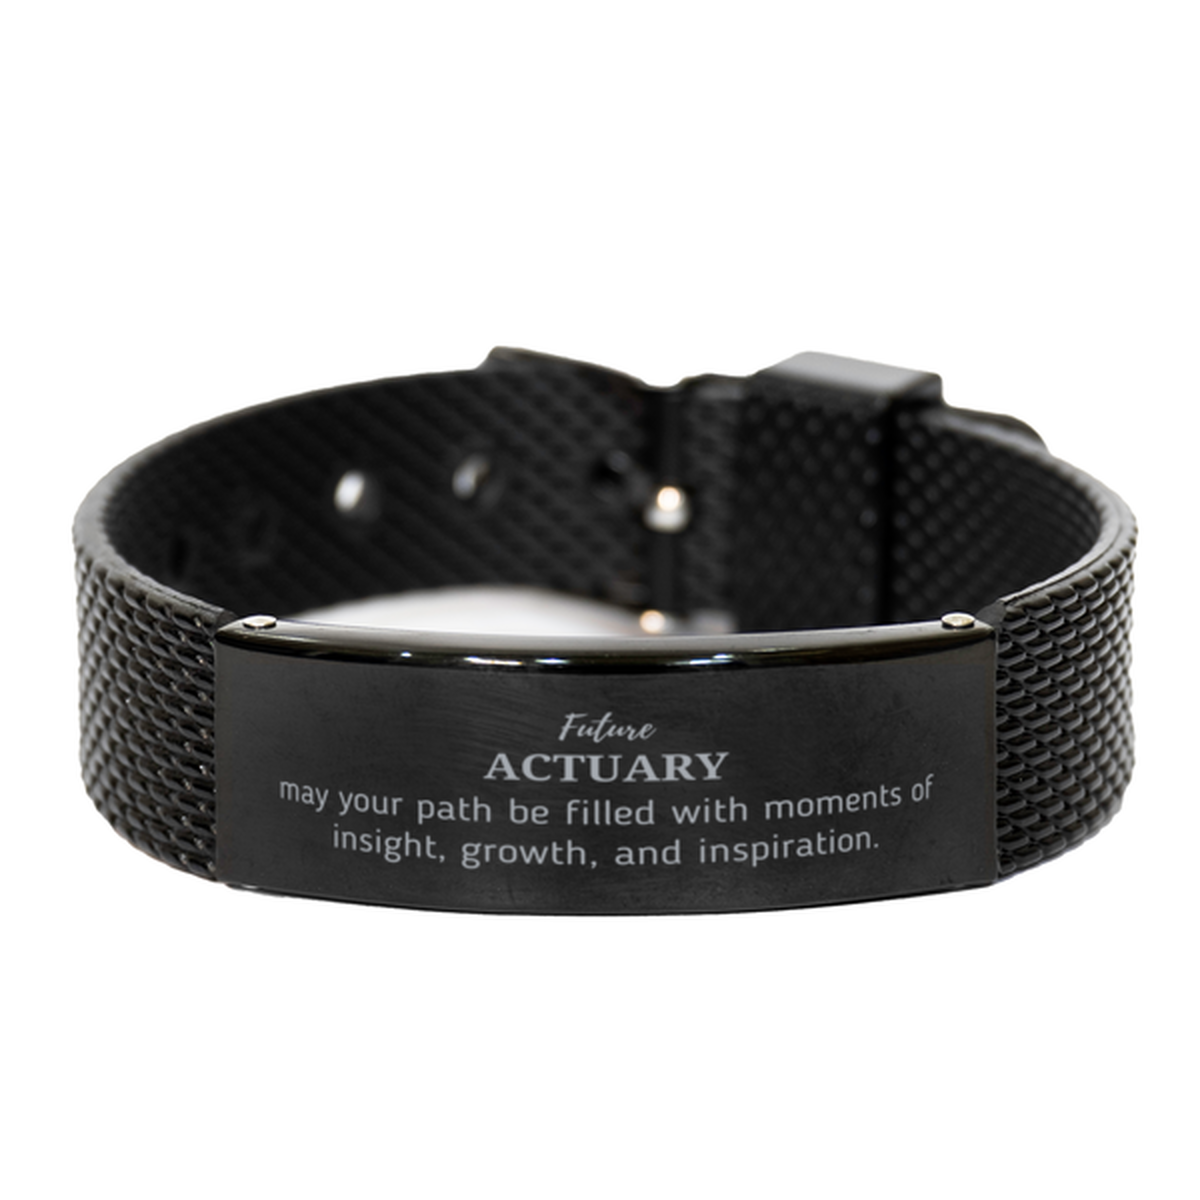 Future Actuary Gifts, May your path be filled with moments of insight, Graduation Gifts for New Actuary, Christmas Unique Black Shark Mesh Bracelet For Men, Women, Friends